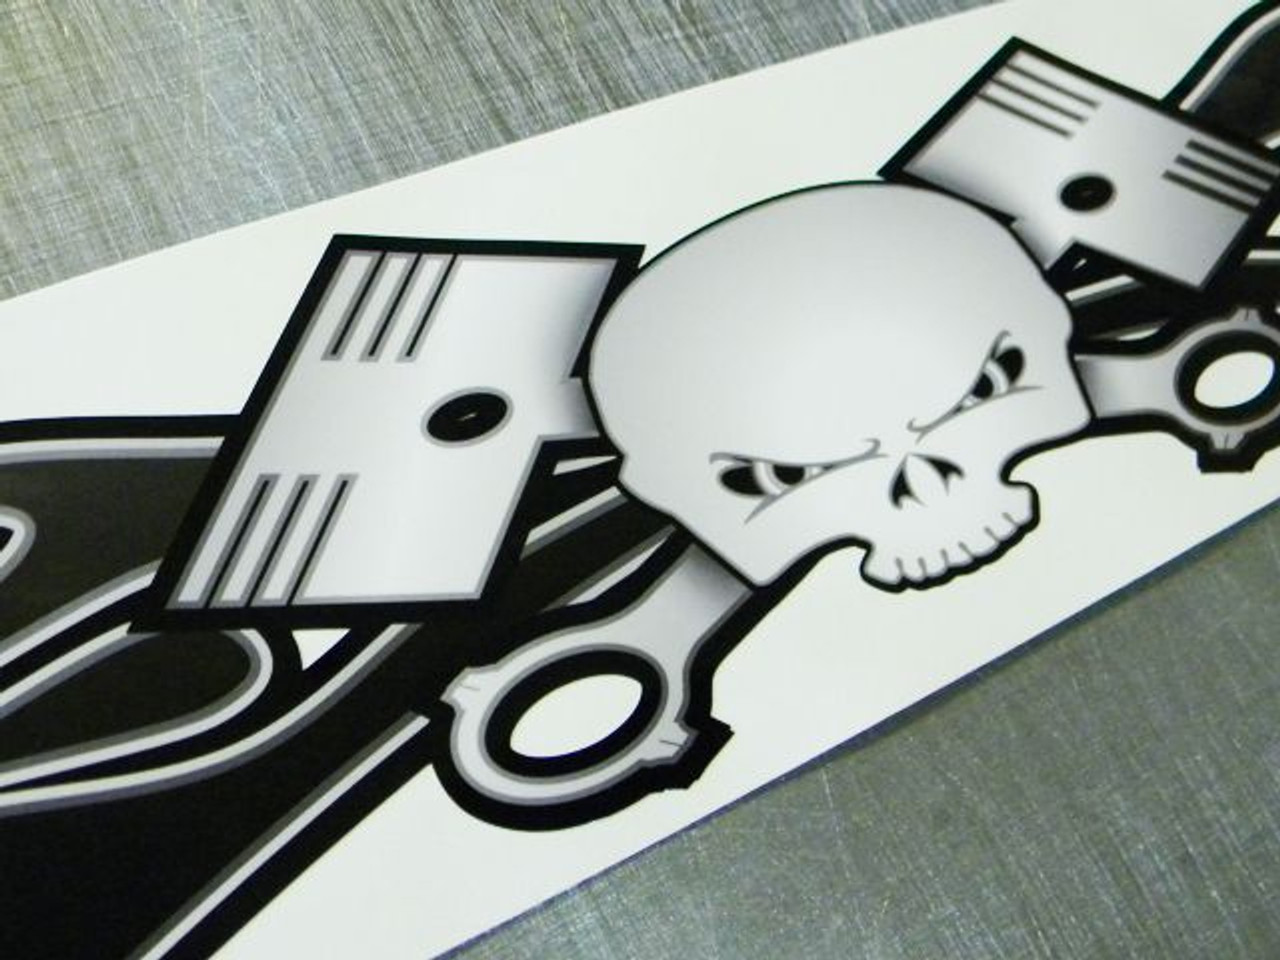 Shown on backing paper, prior to shipment. this decal has no background